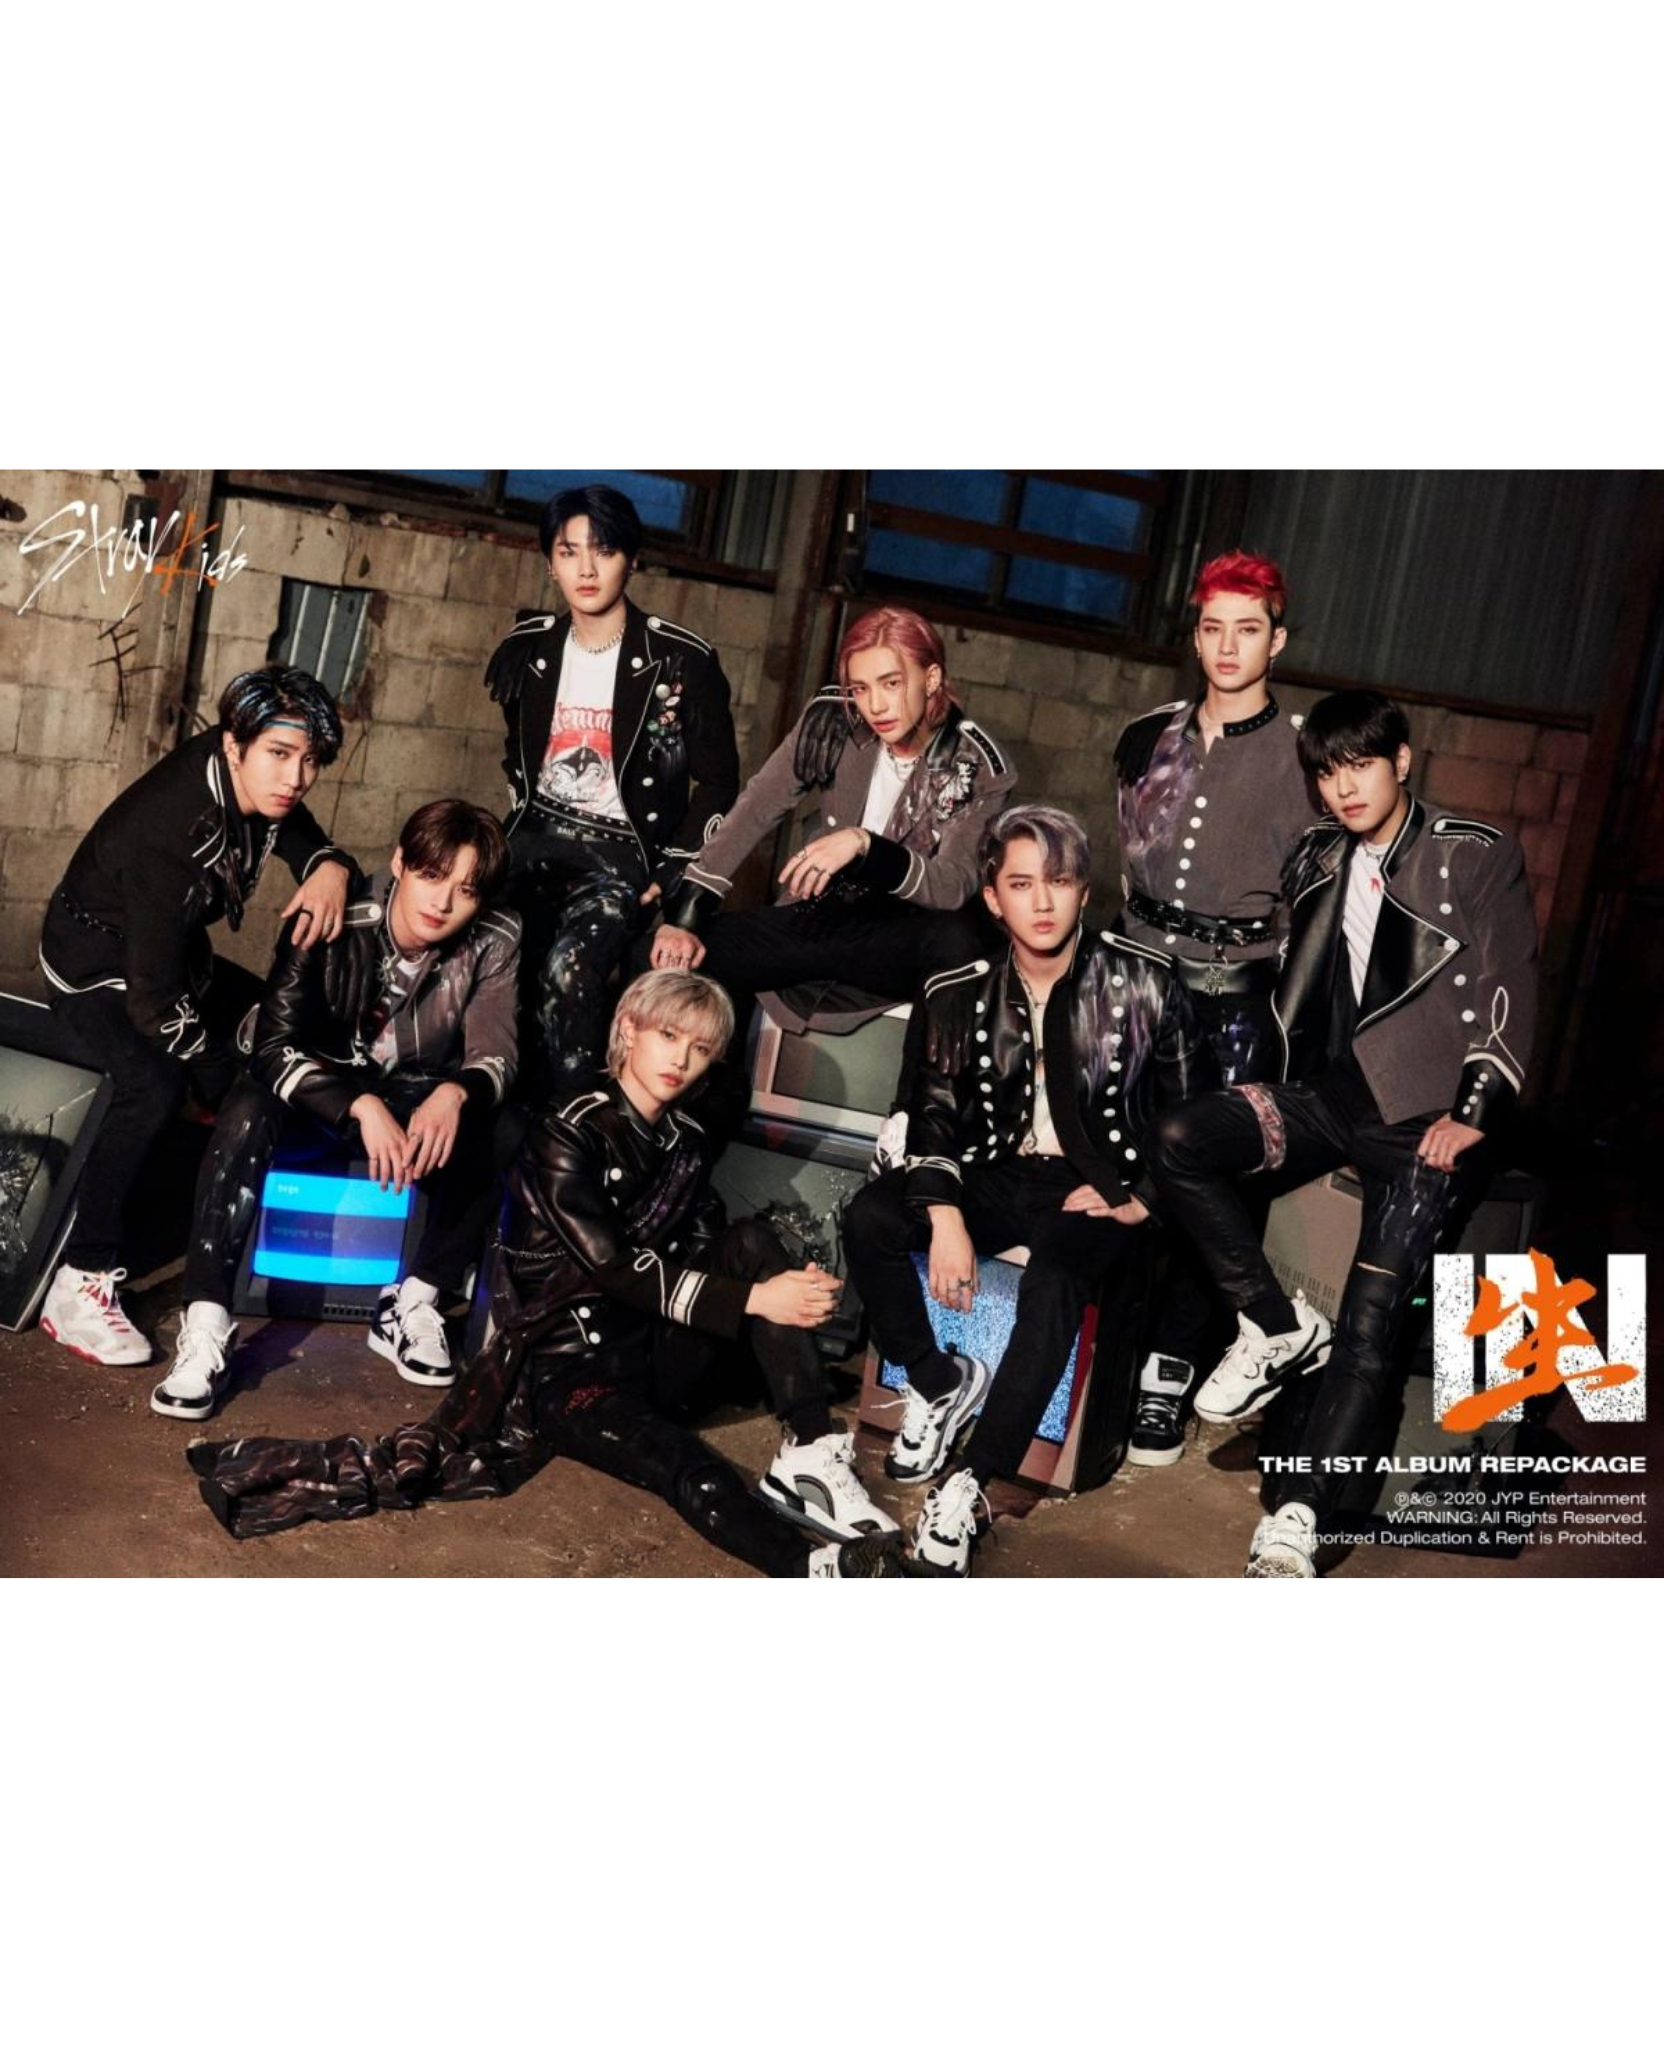 STRAY KIDS - 1st Repackage - IN生 (IN LIFE) Stray Kids